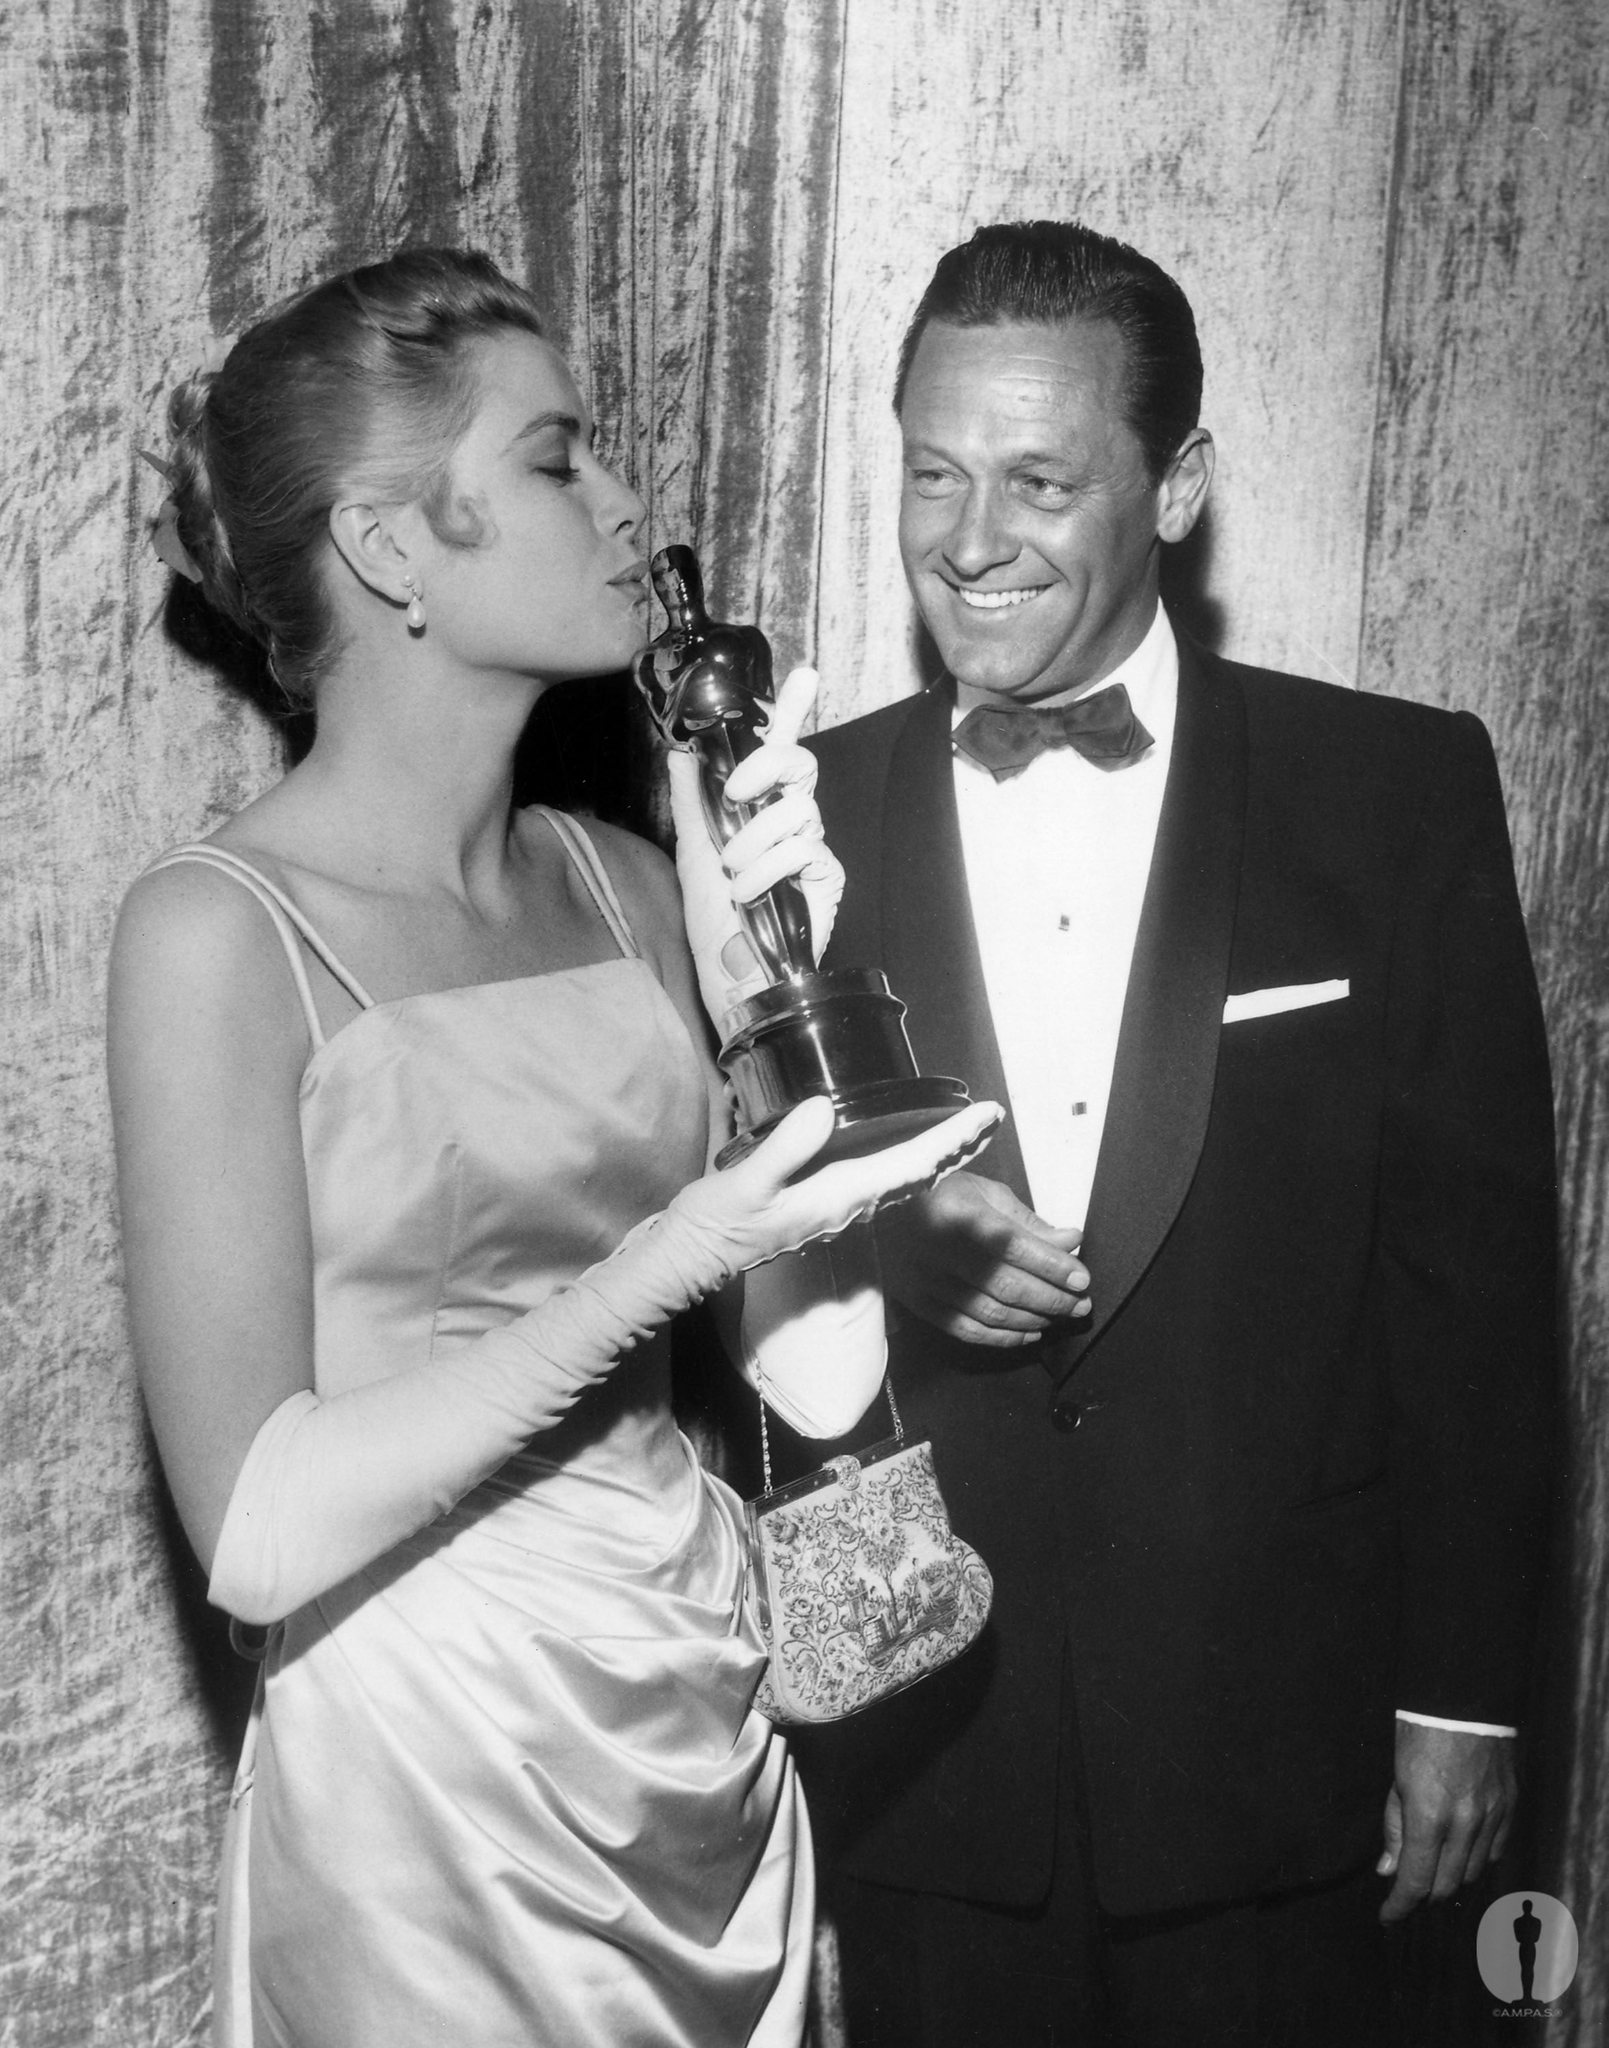 Best Actress Grace Kelly (The Country Girl) with presenter William Holden at the 27th Academy Awards.